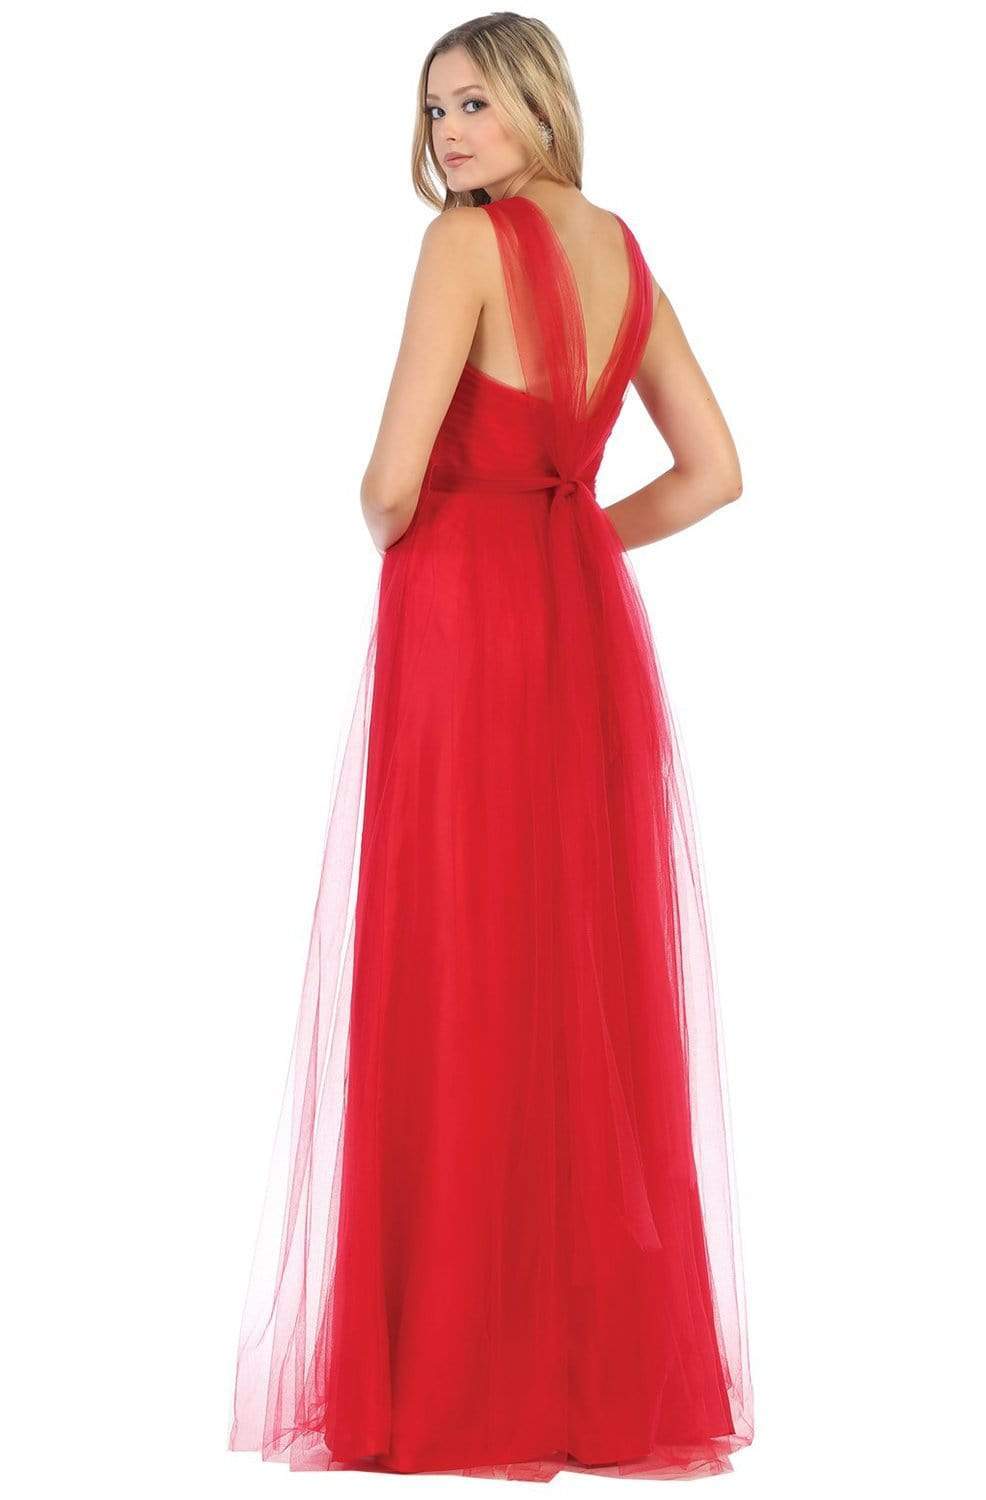 May Queen - MQ1728 Illusion Sweetheart A-Line Dress Prom Dresses 4 / Red